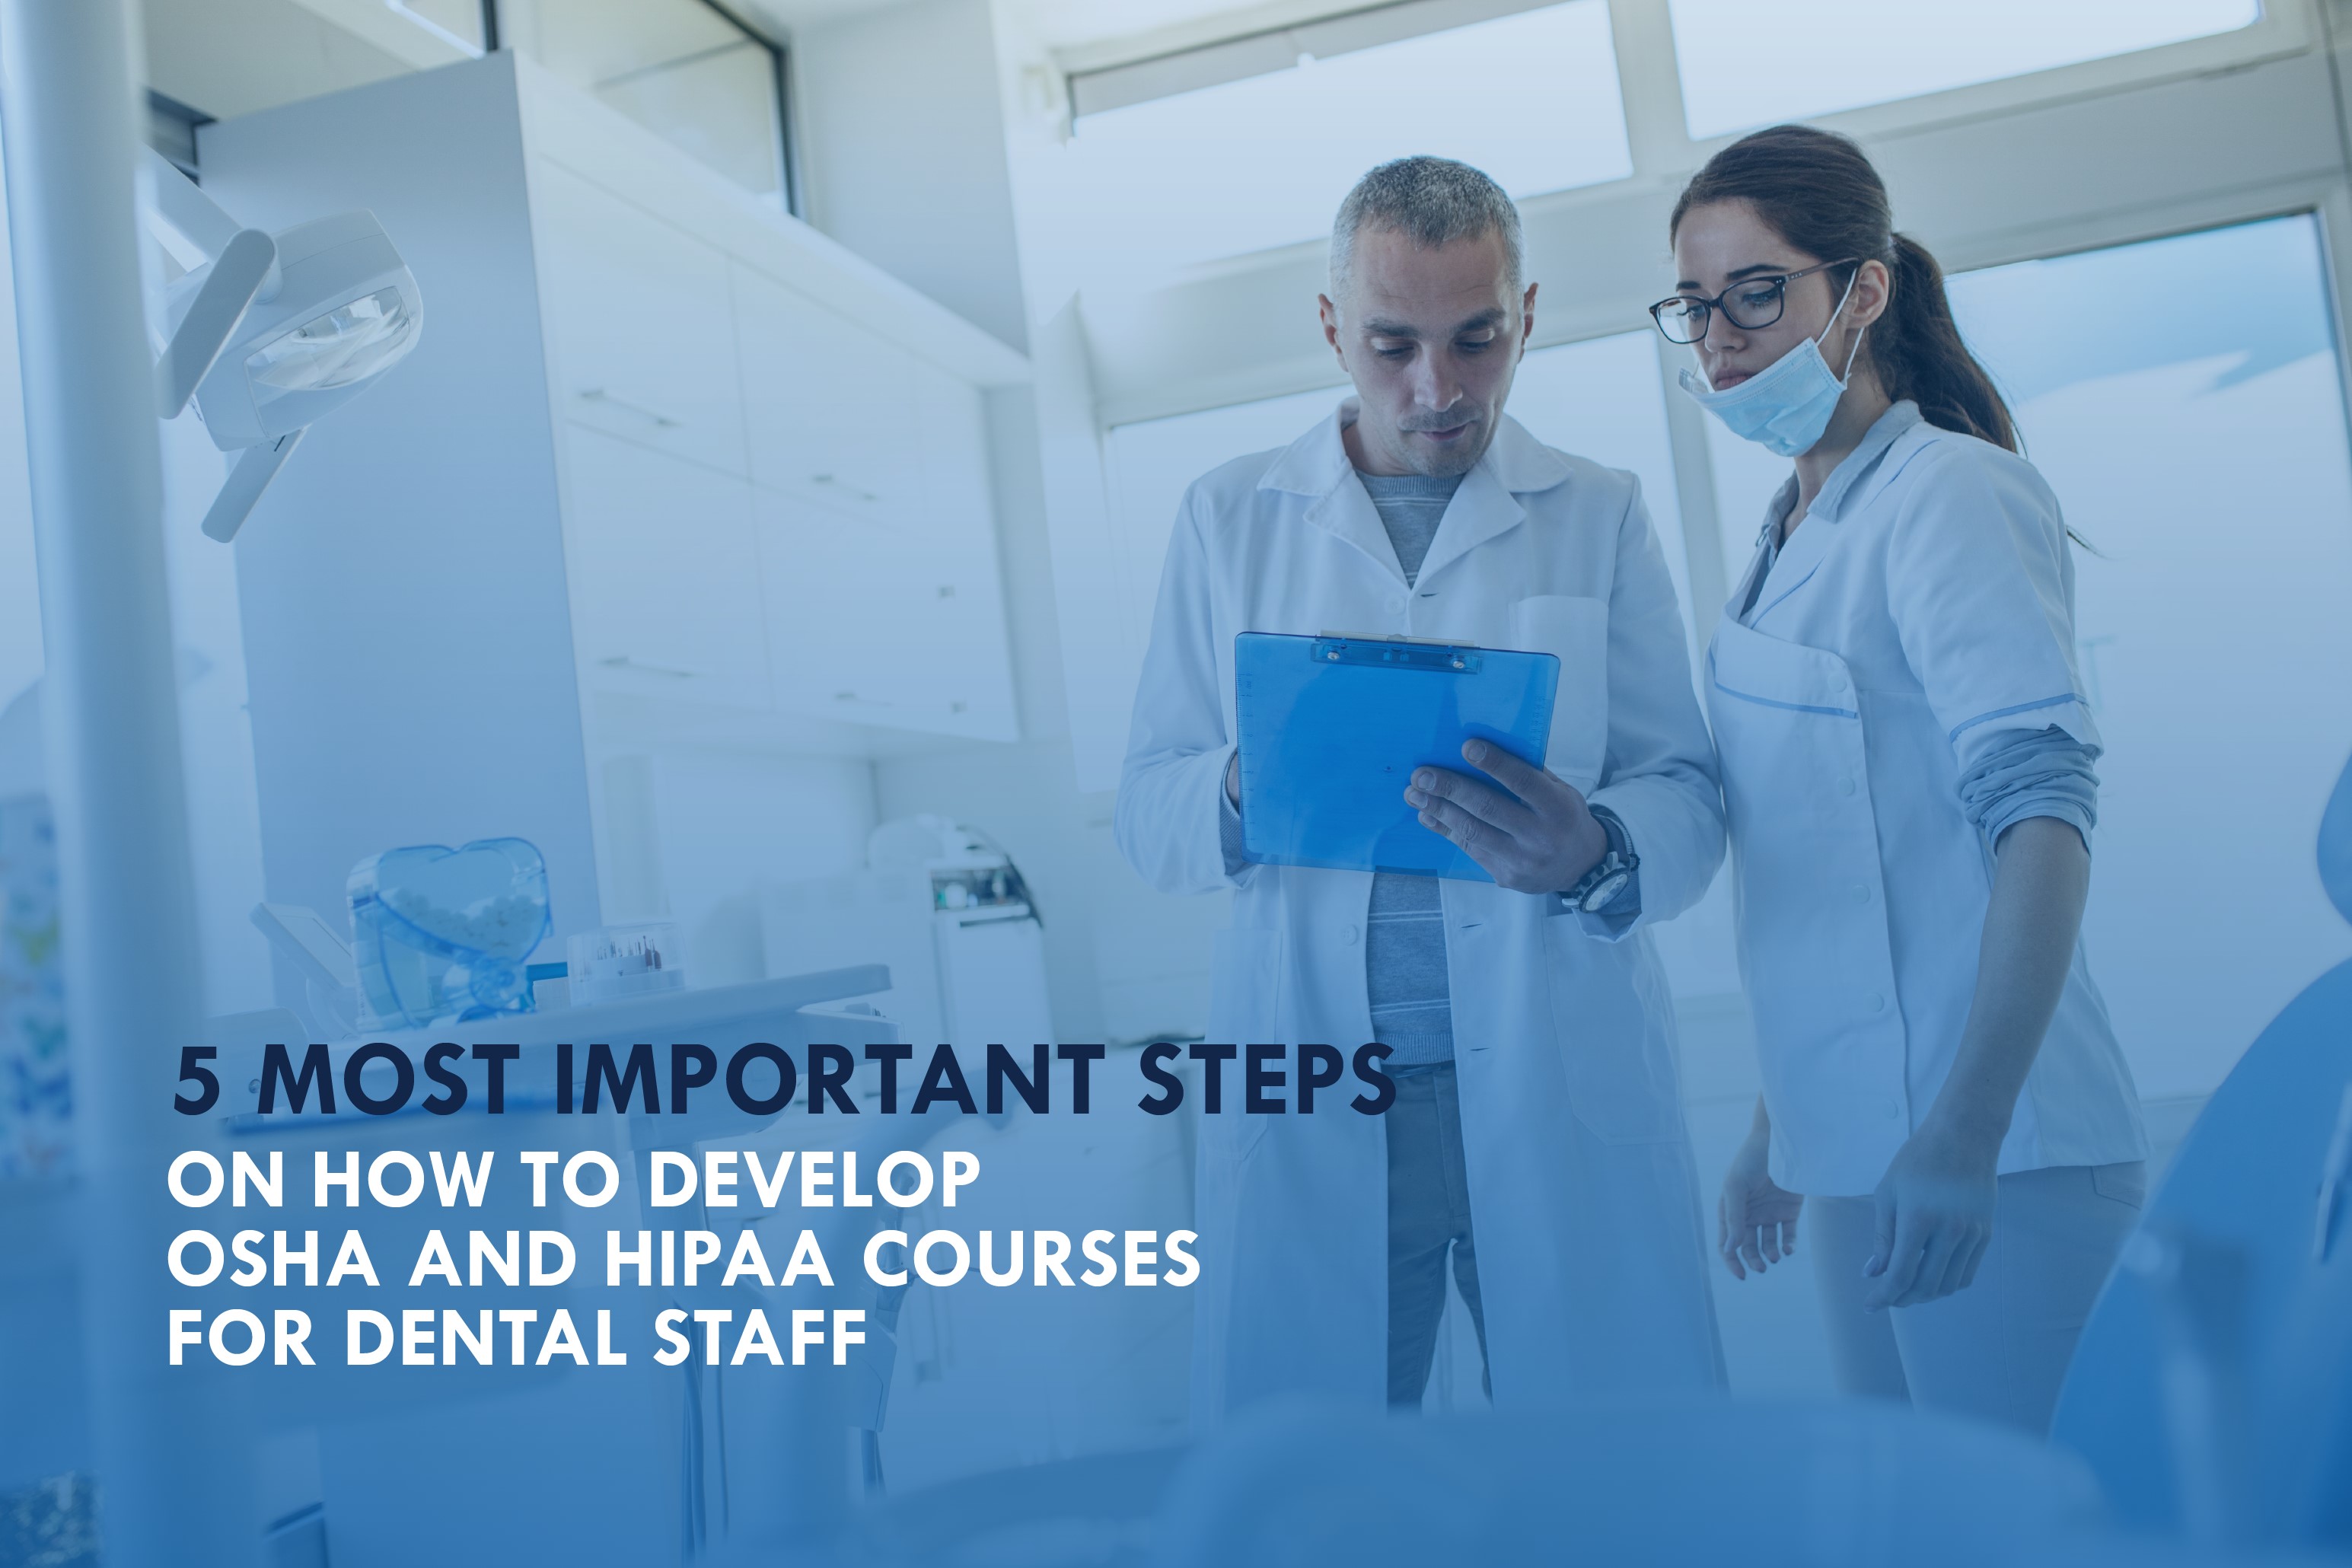 5 most important steps How to develop OSHA and HIPAA courses for dental staff